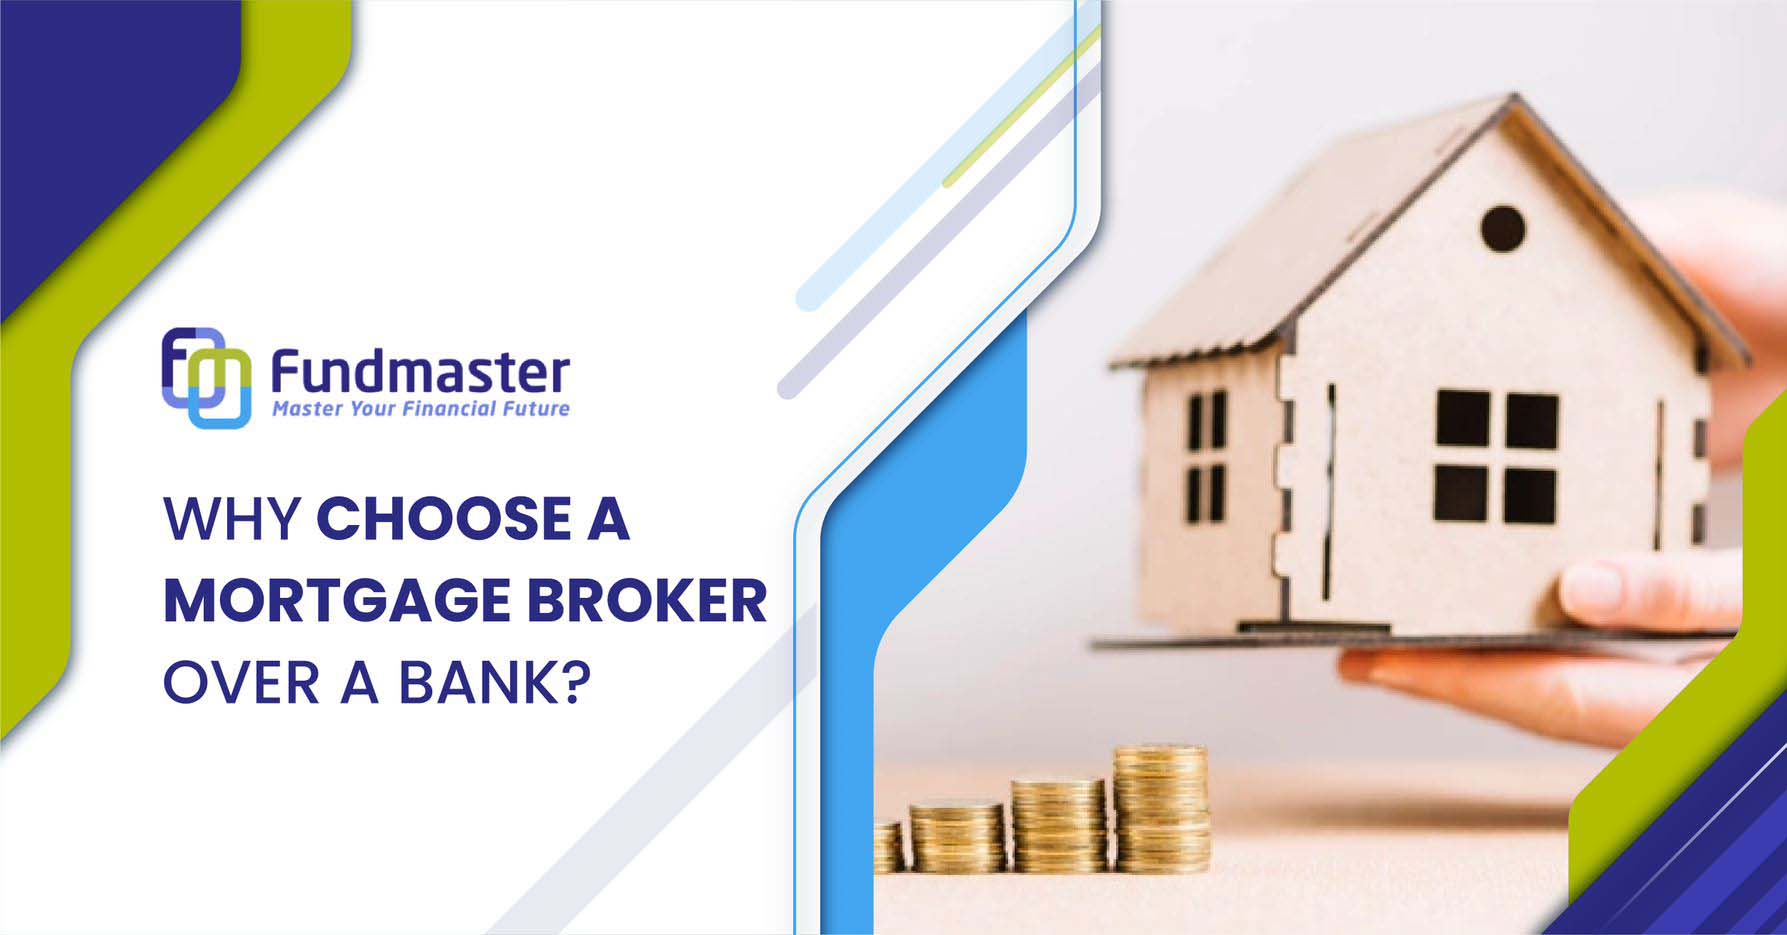 Why choose mortgage broker over a bank?